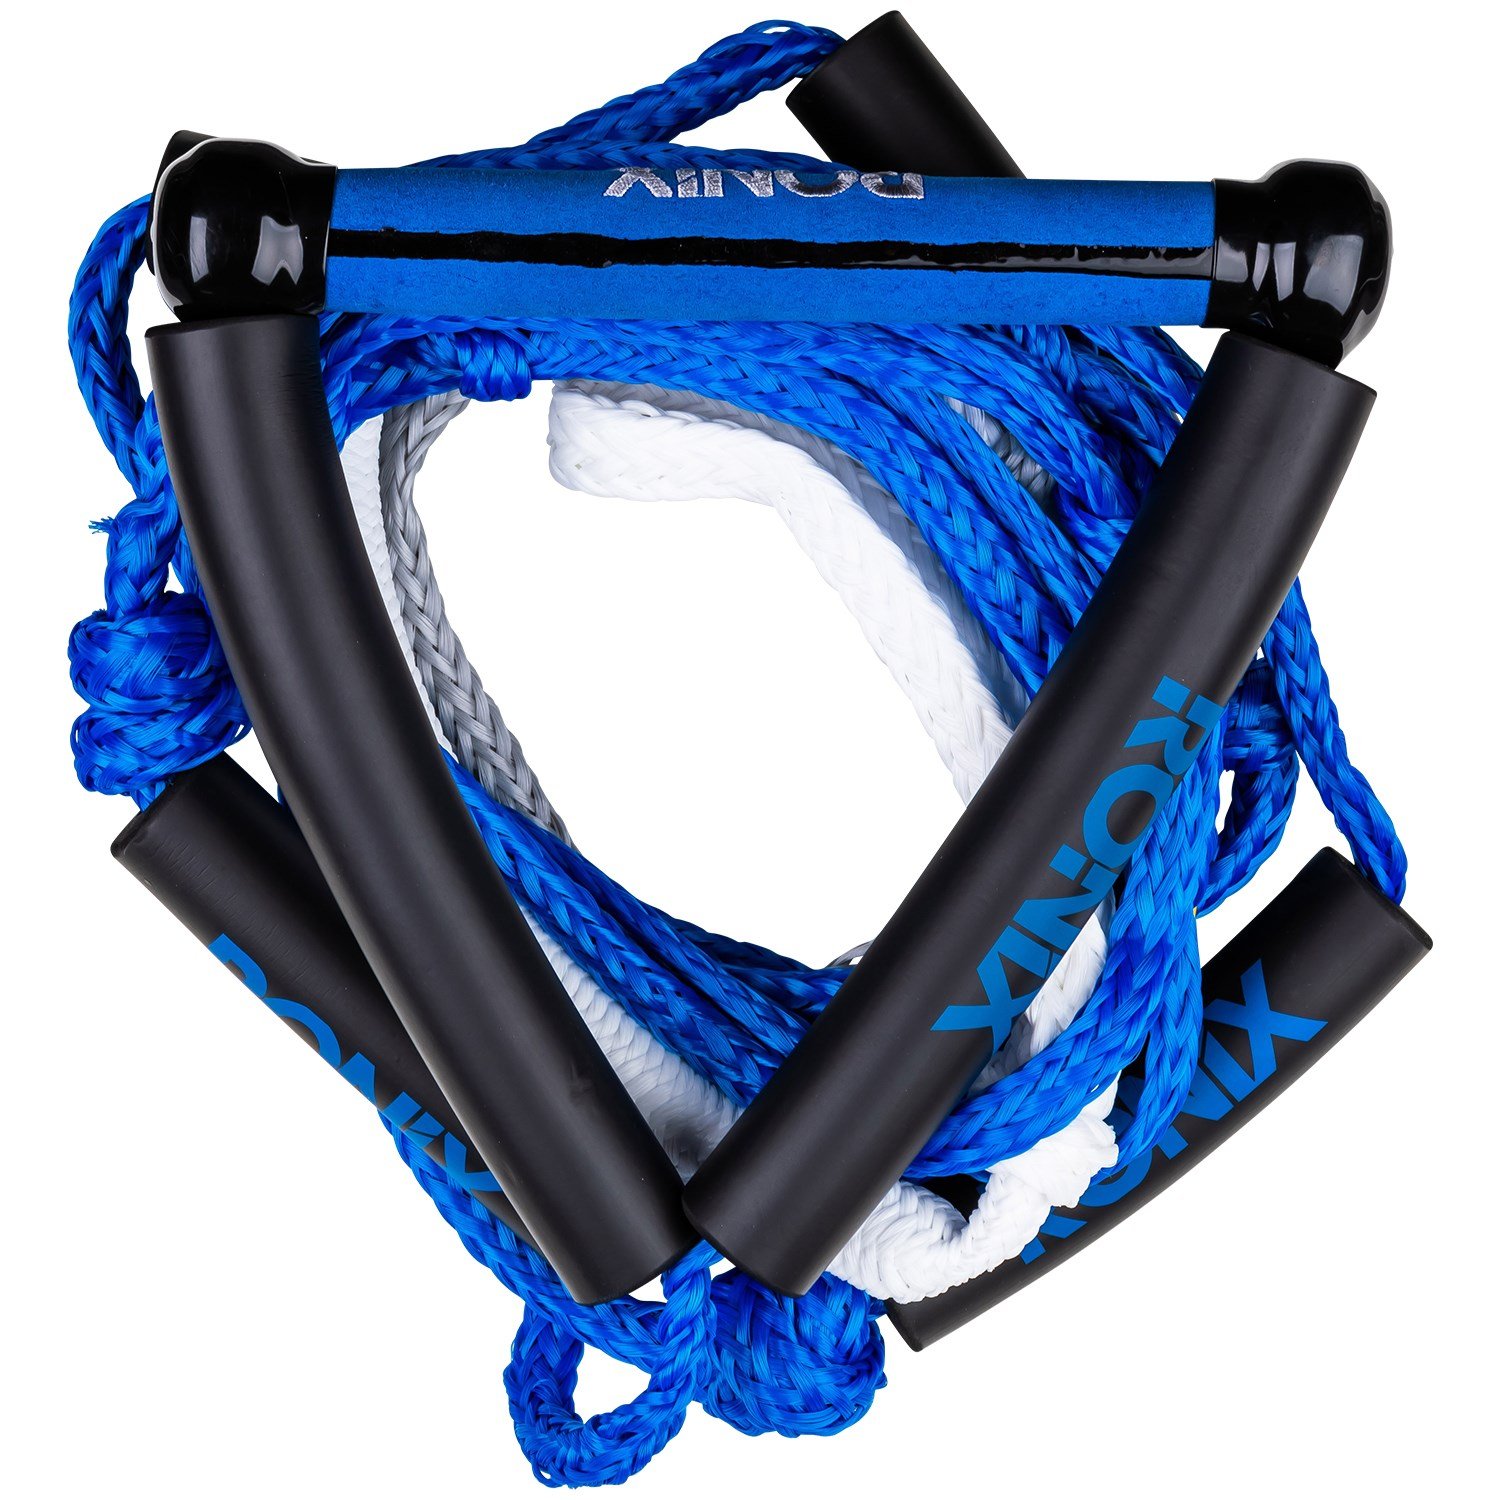 2020 Ronix Bungee Surf Rope-10 Handle Hide Grip Rope  25ft 5-Sect